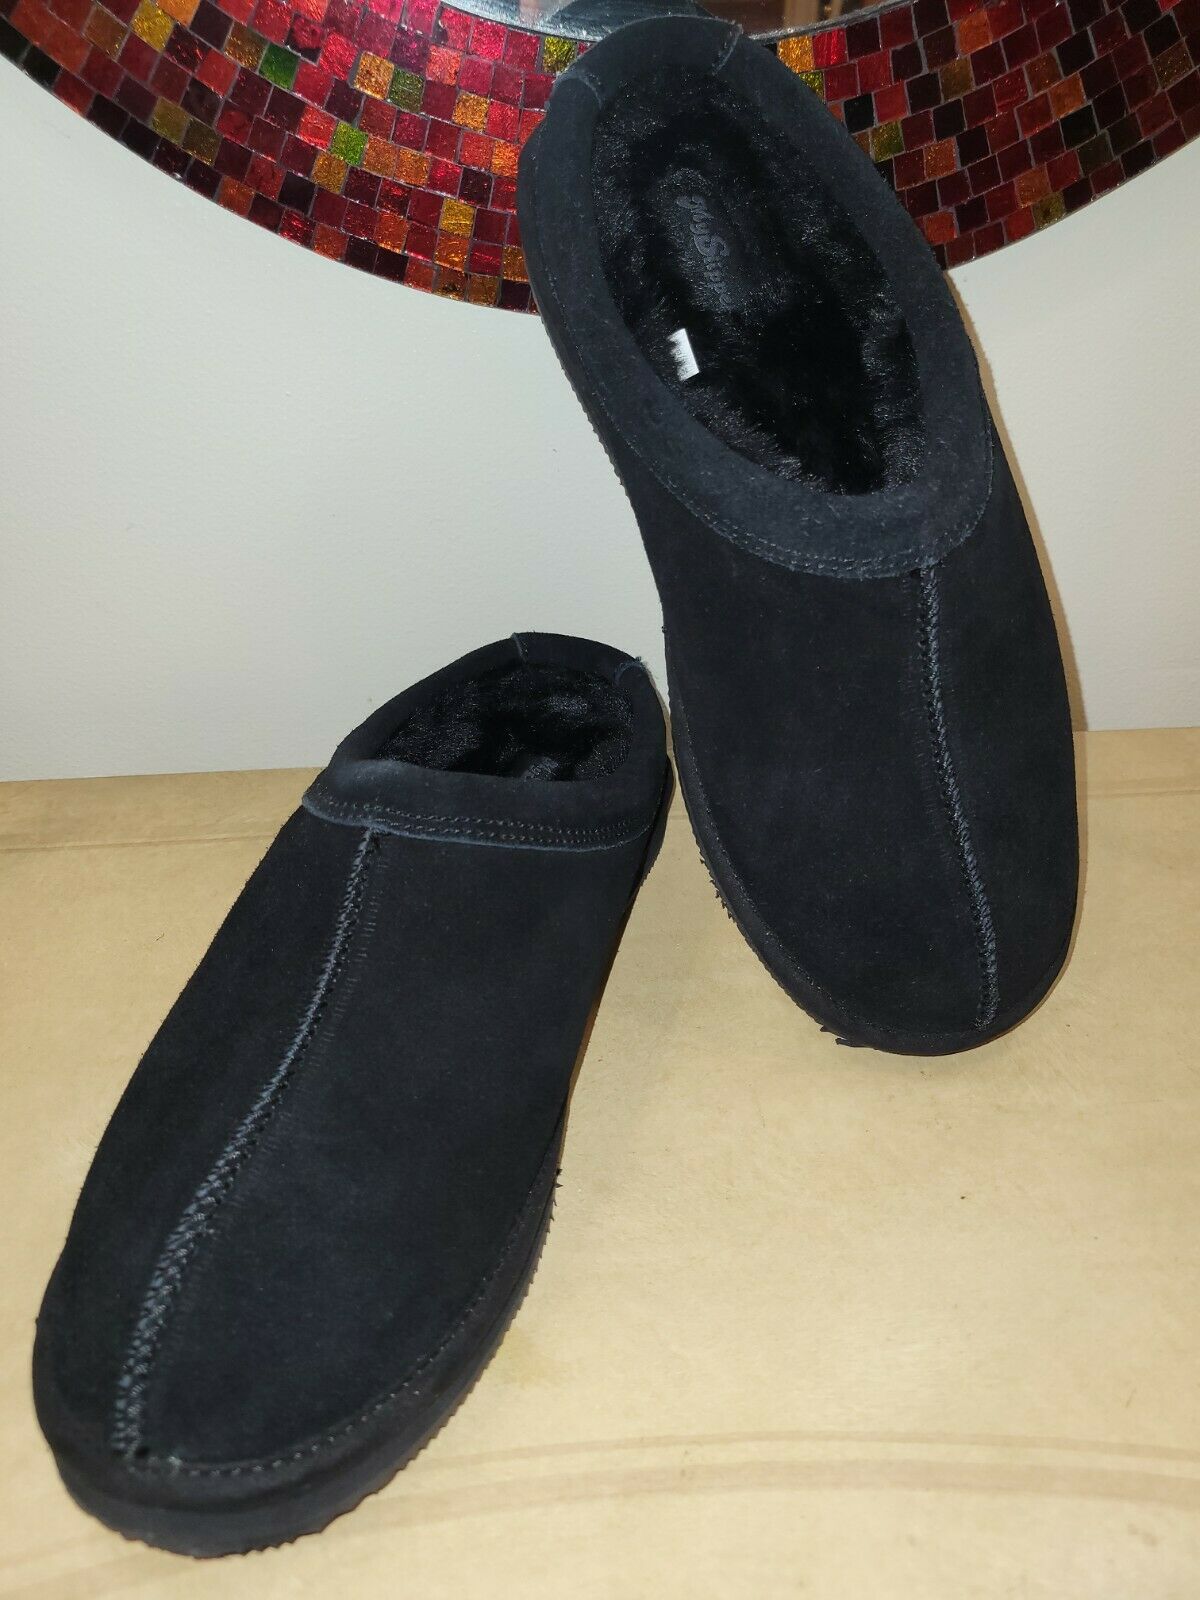 My Slippers Men's 9M Black Suede House Shoes Run Small Fit 8.5 M Slip On Slipper